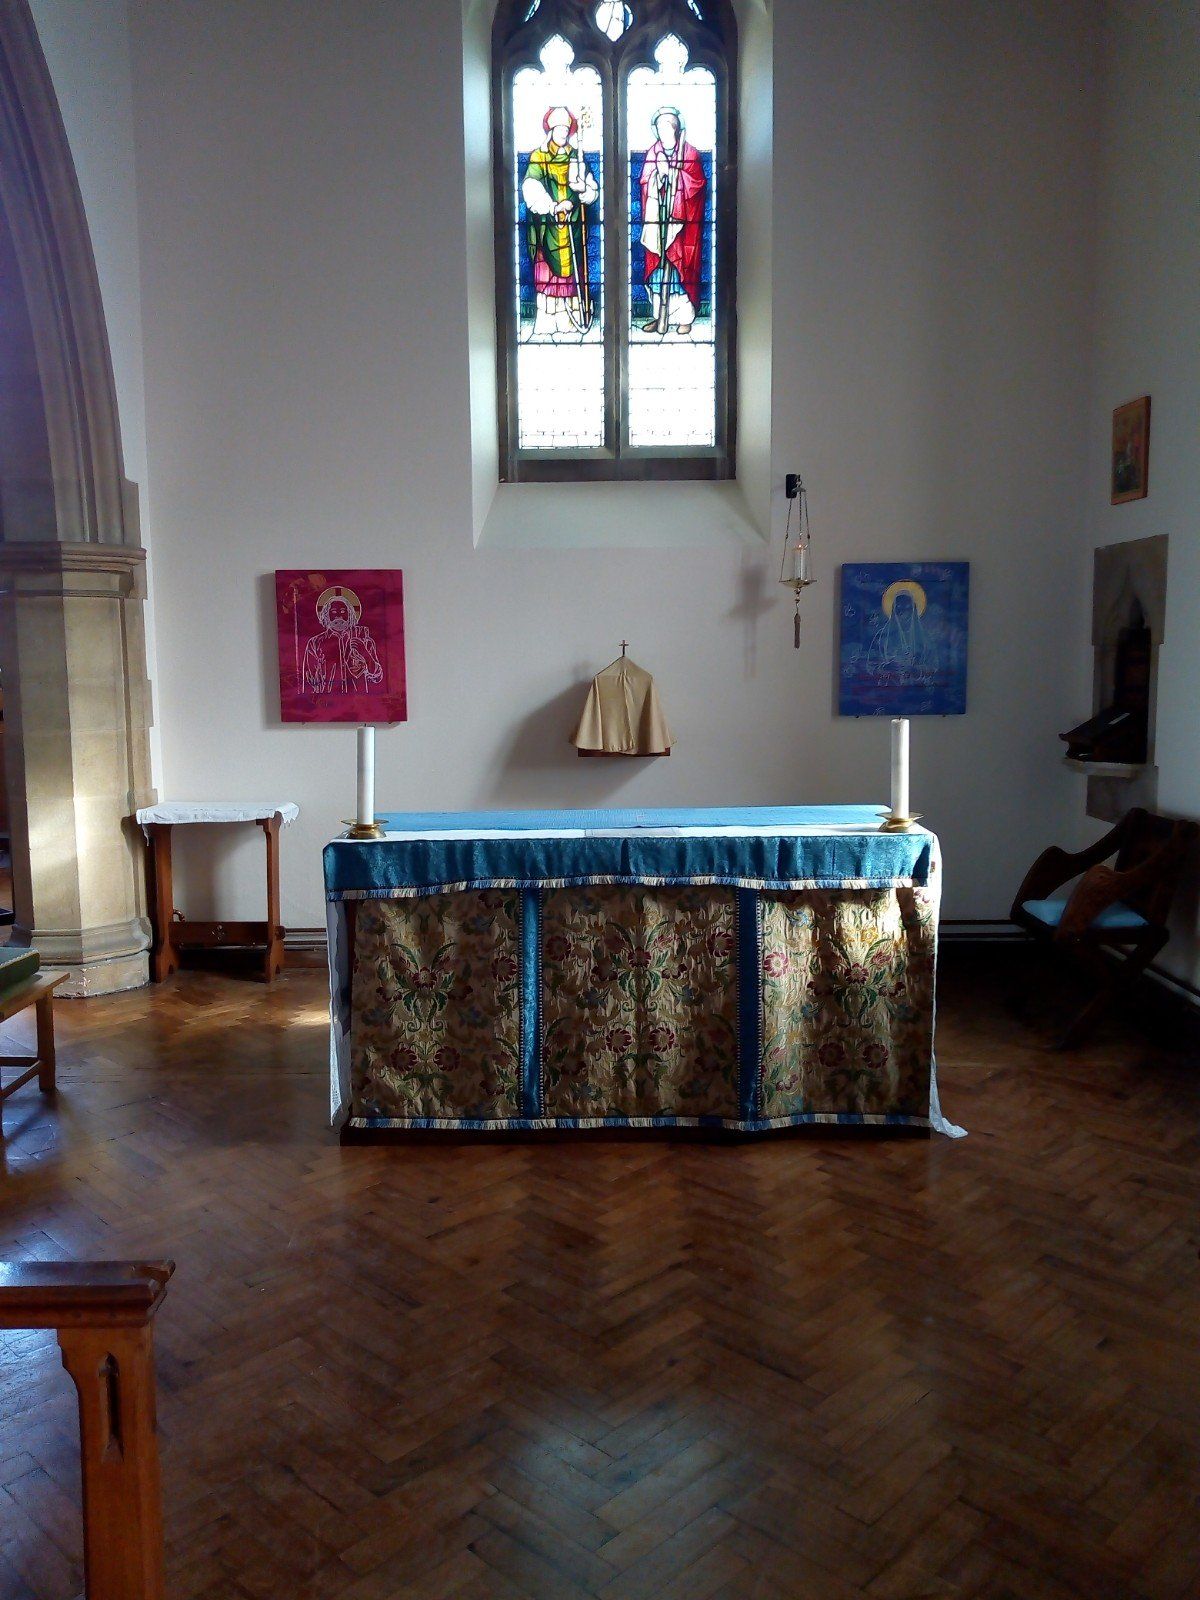 Lady Chapel altar and icons (inside St Michael's Church)